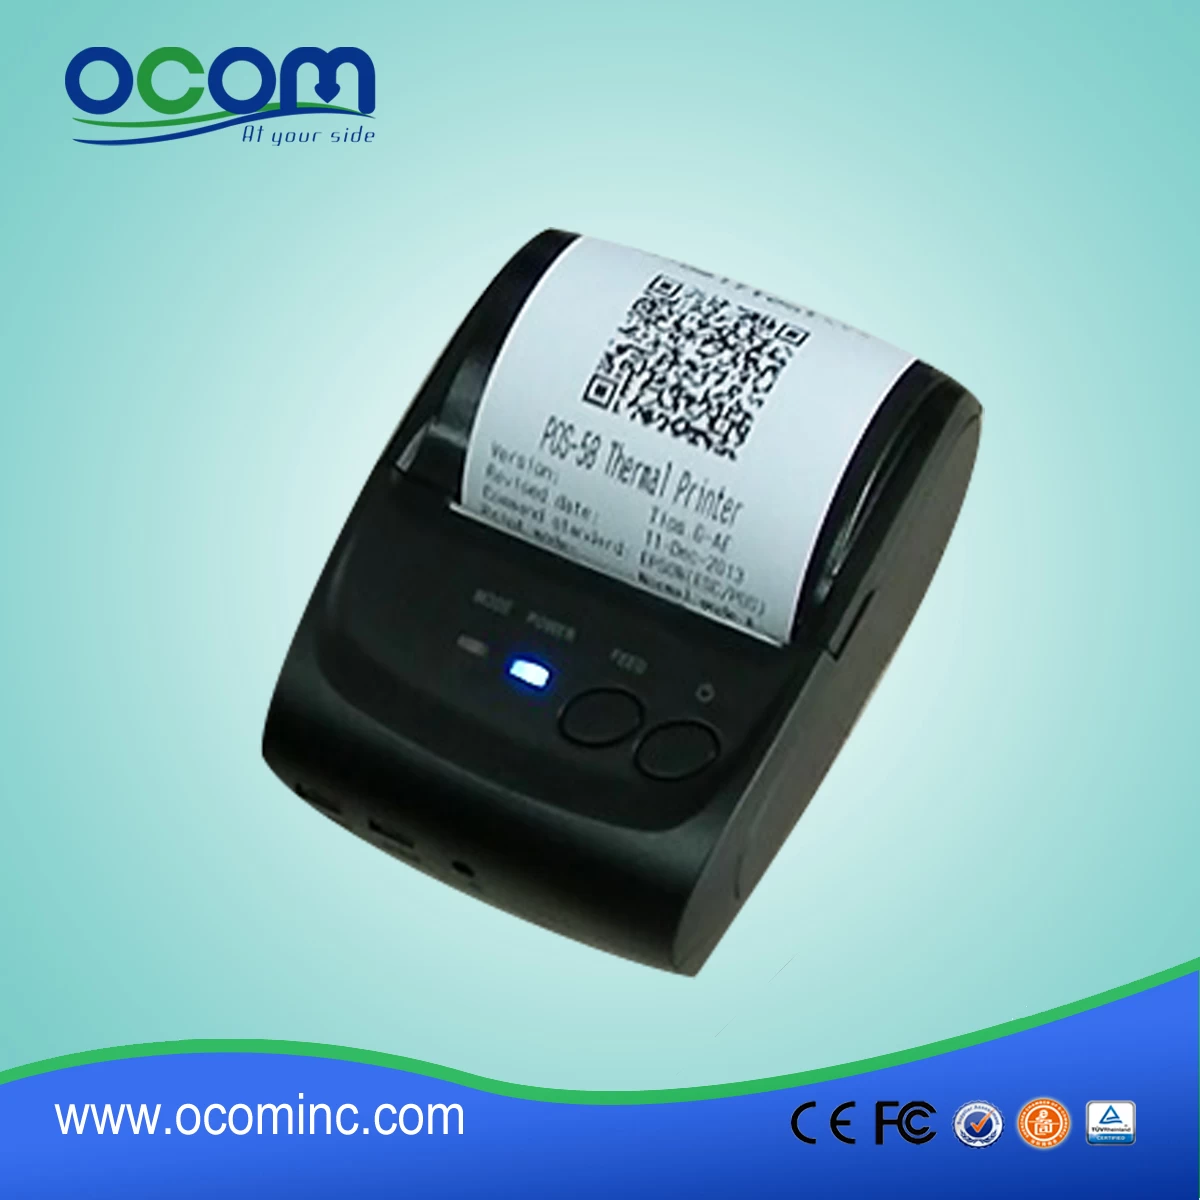 2016 58mm Small Portable Android Bluetooth POS Thermal Printer (OCPP-M05)